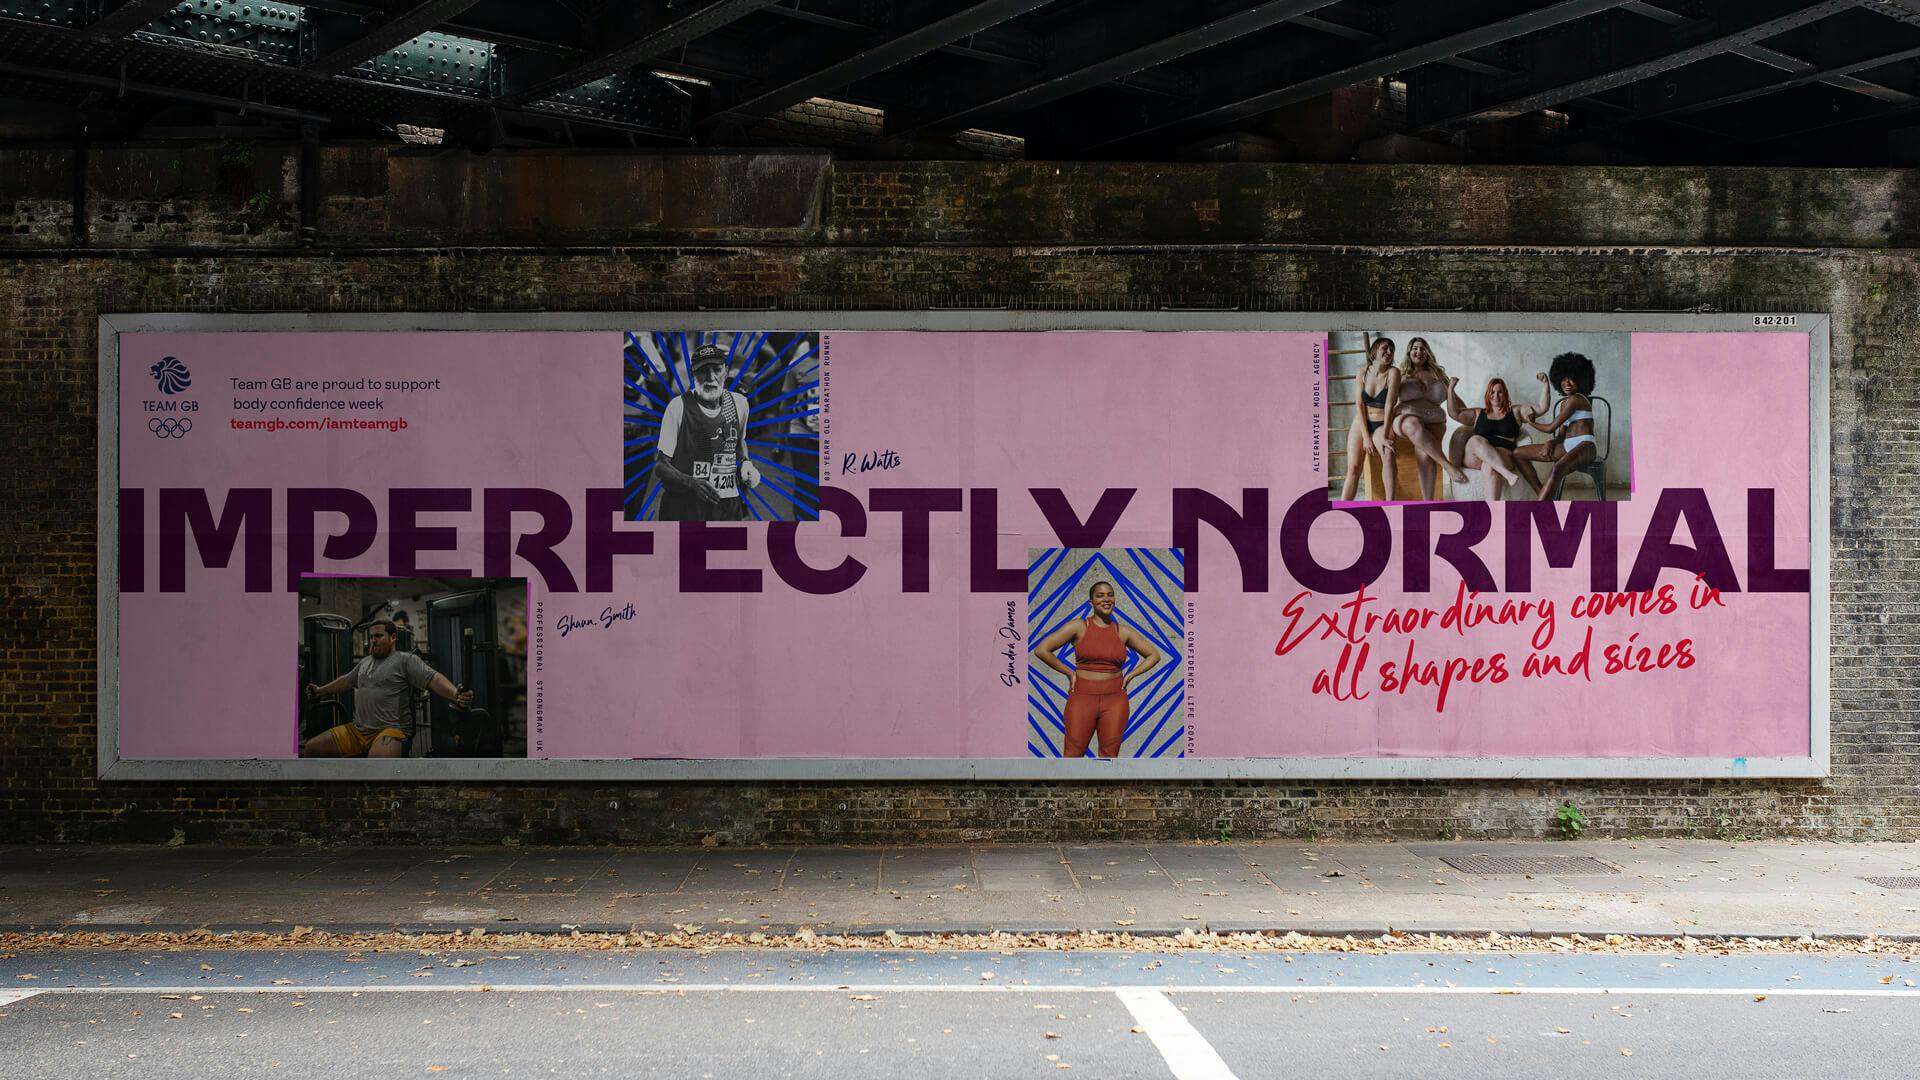 Graphic featuring the Team GB rebrand, as shown on a billboard featuring square images of athletes, headlined 'Imperfectly normal' with the sub headline 'Extraordinary comes in all shapes and sizes' laid out in a handwritten-style font